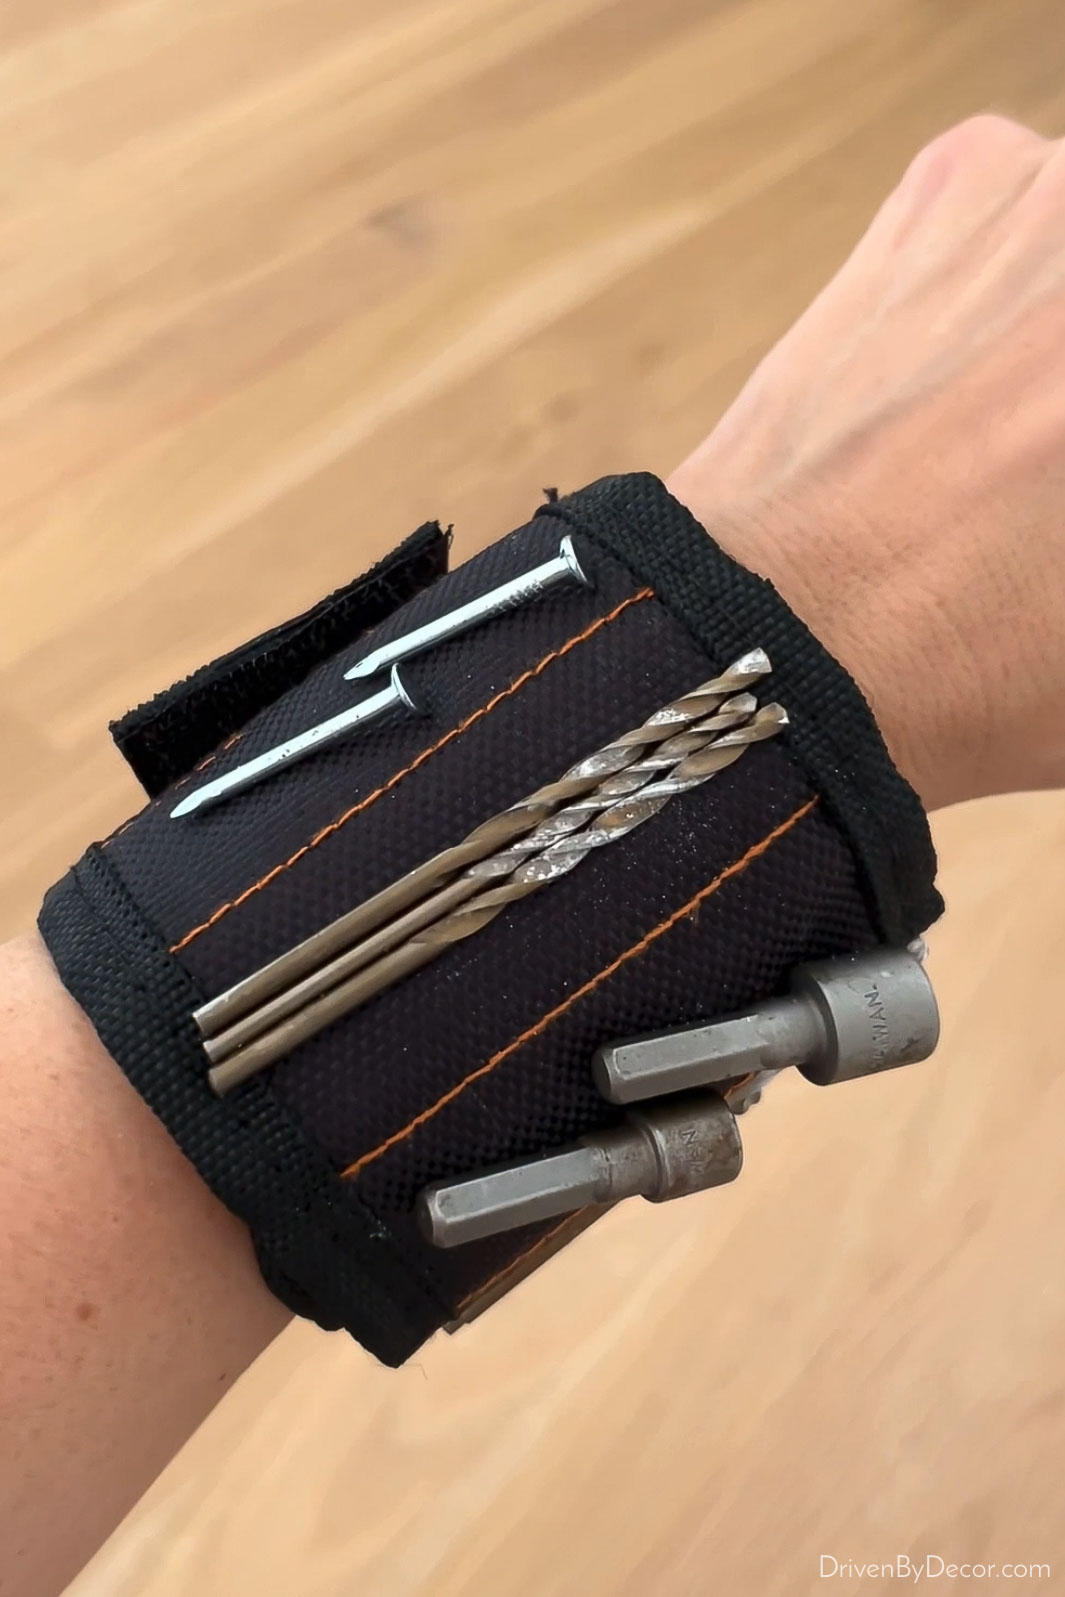 Magnetic wristband that securely holds nails, screw, drill bits, and more - great Father's Day gift!